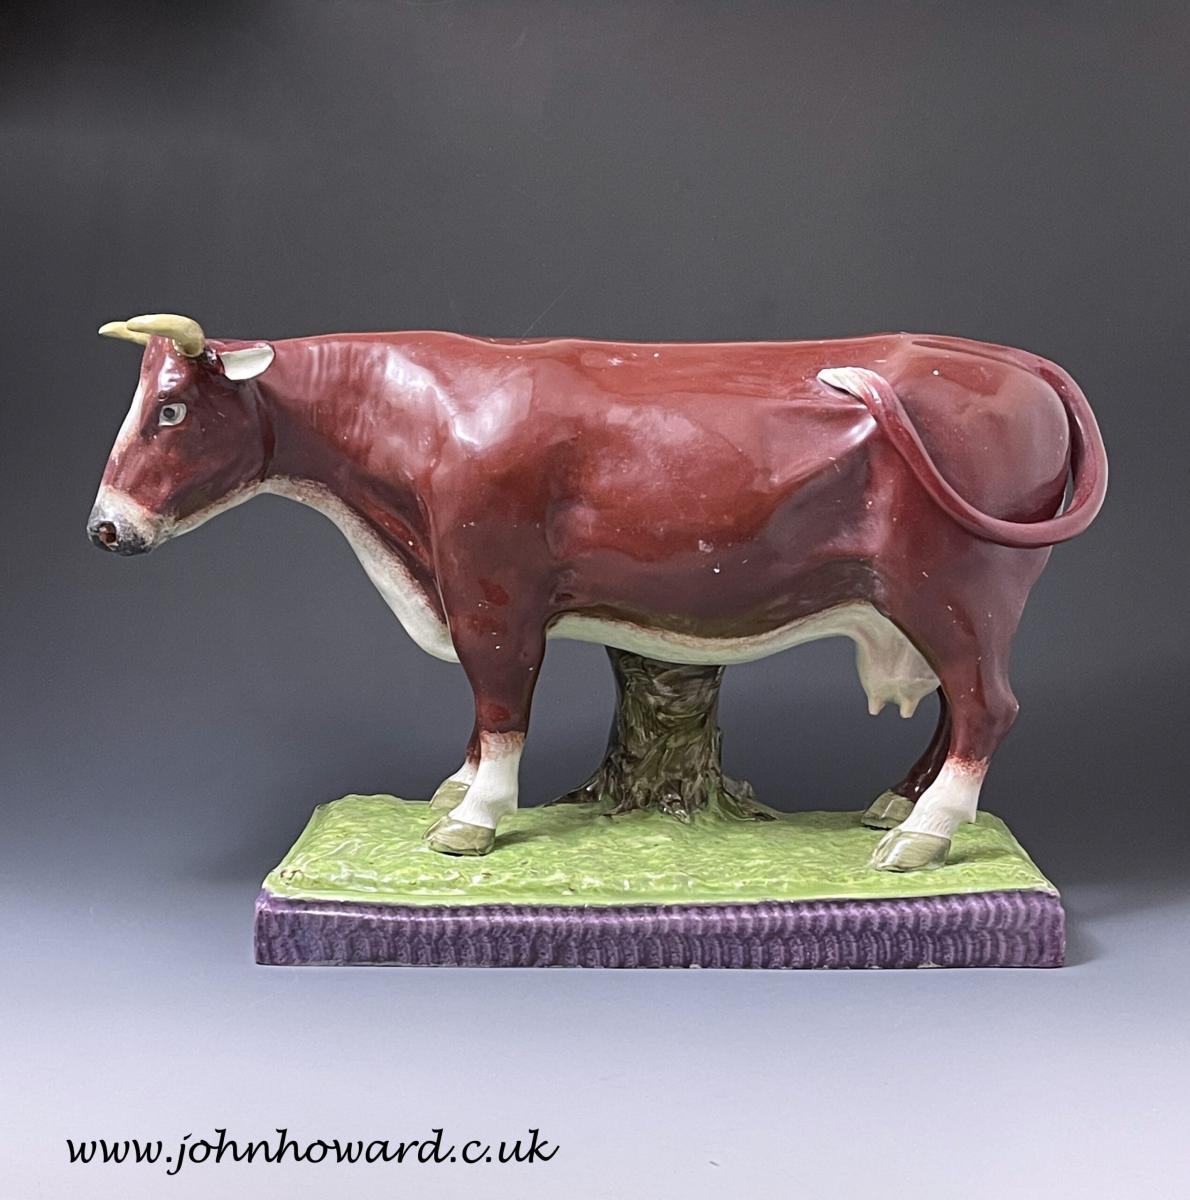 Large scale pottery pearlware figure of a cow standing on a base Staffordshire England early 19th century